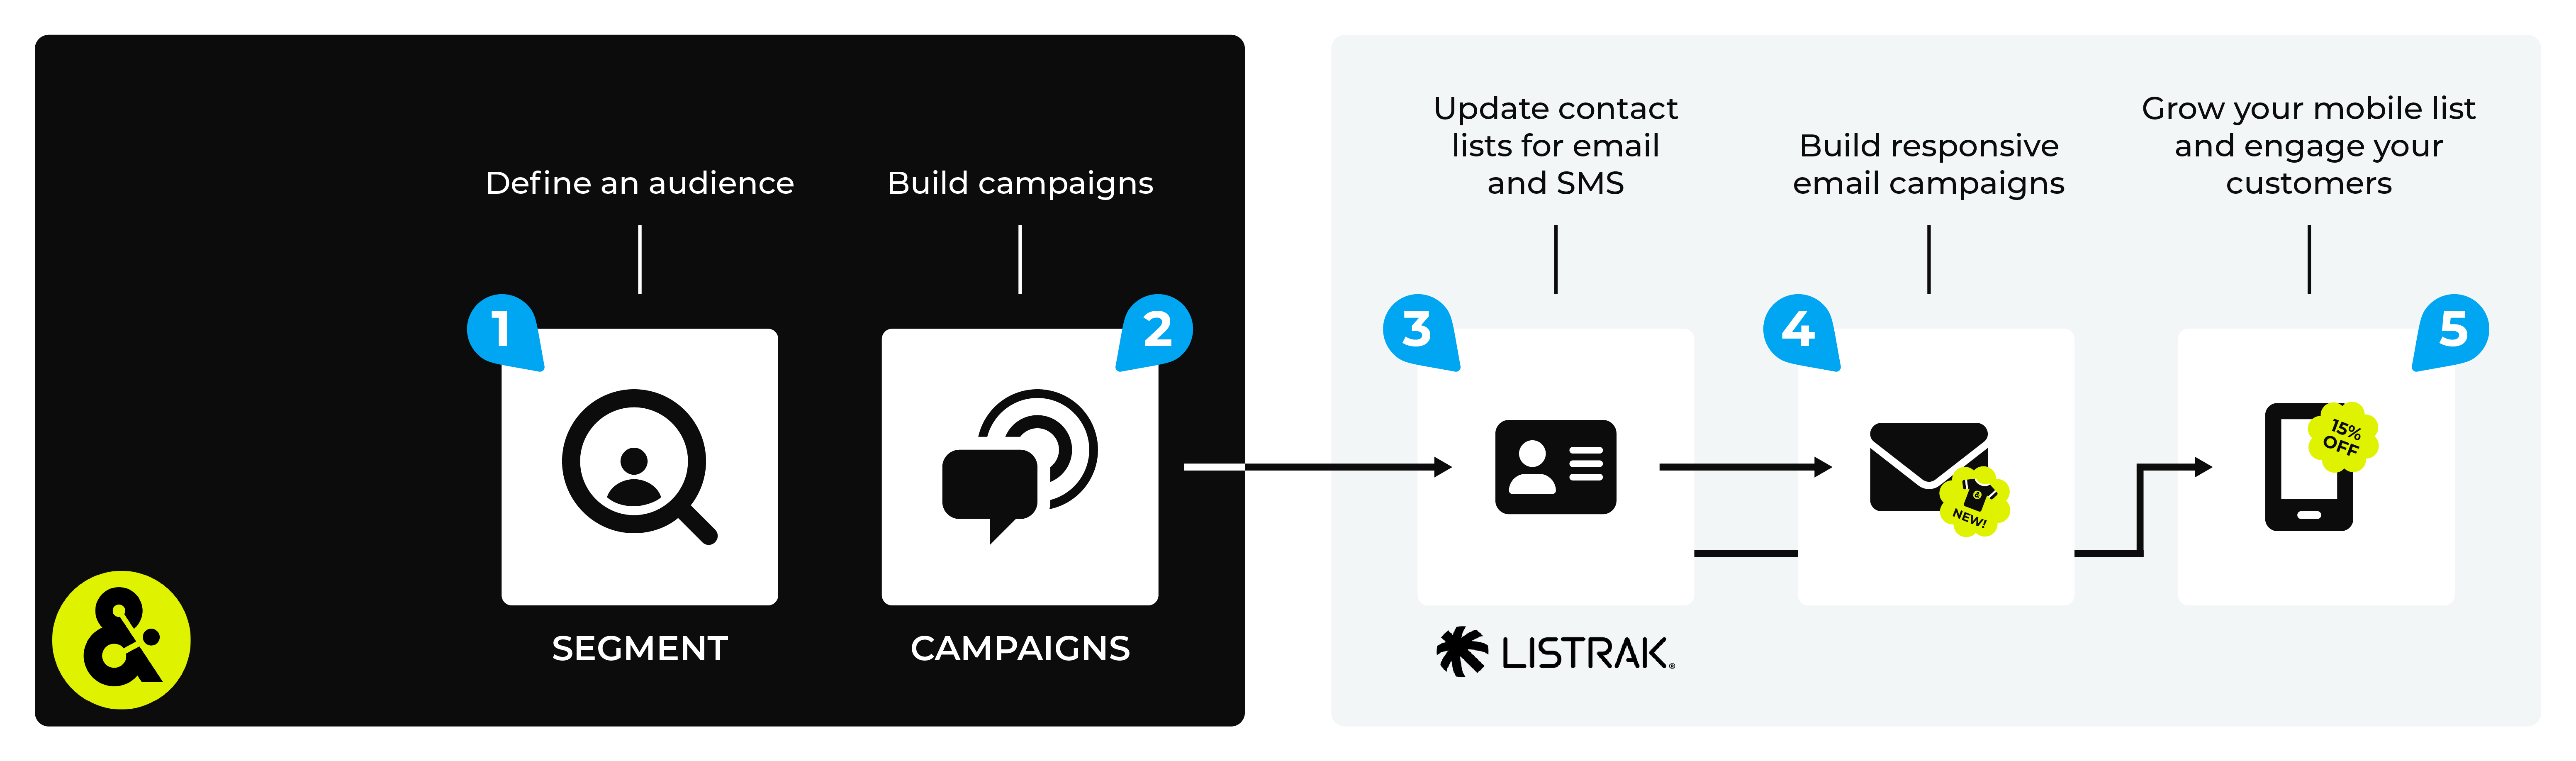 Send email and SMS lists to Listrak.